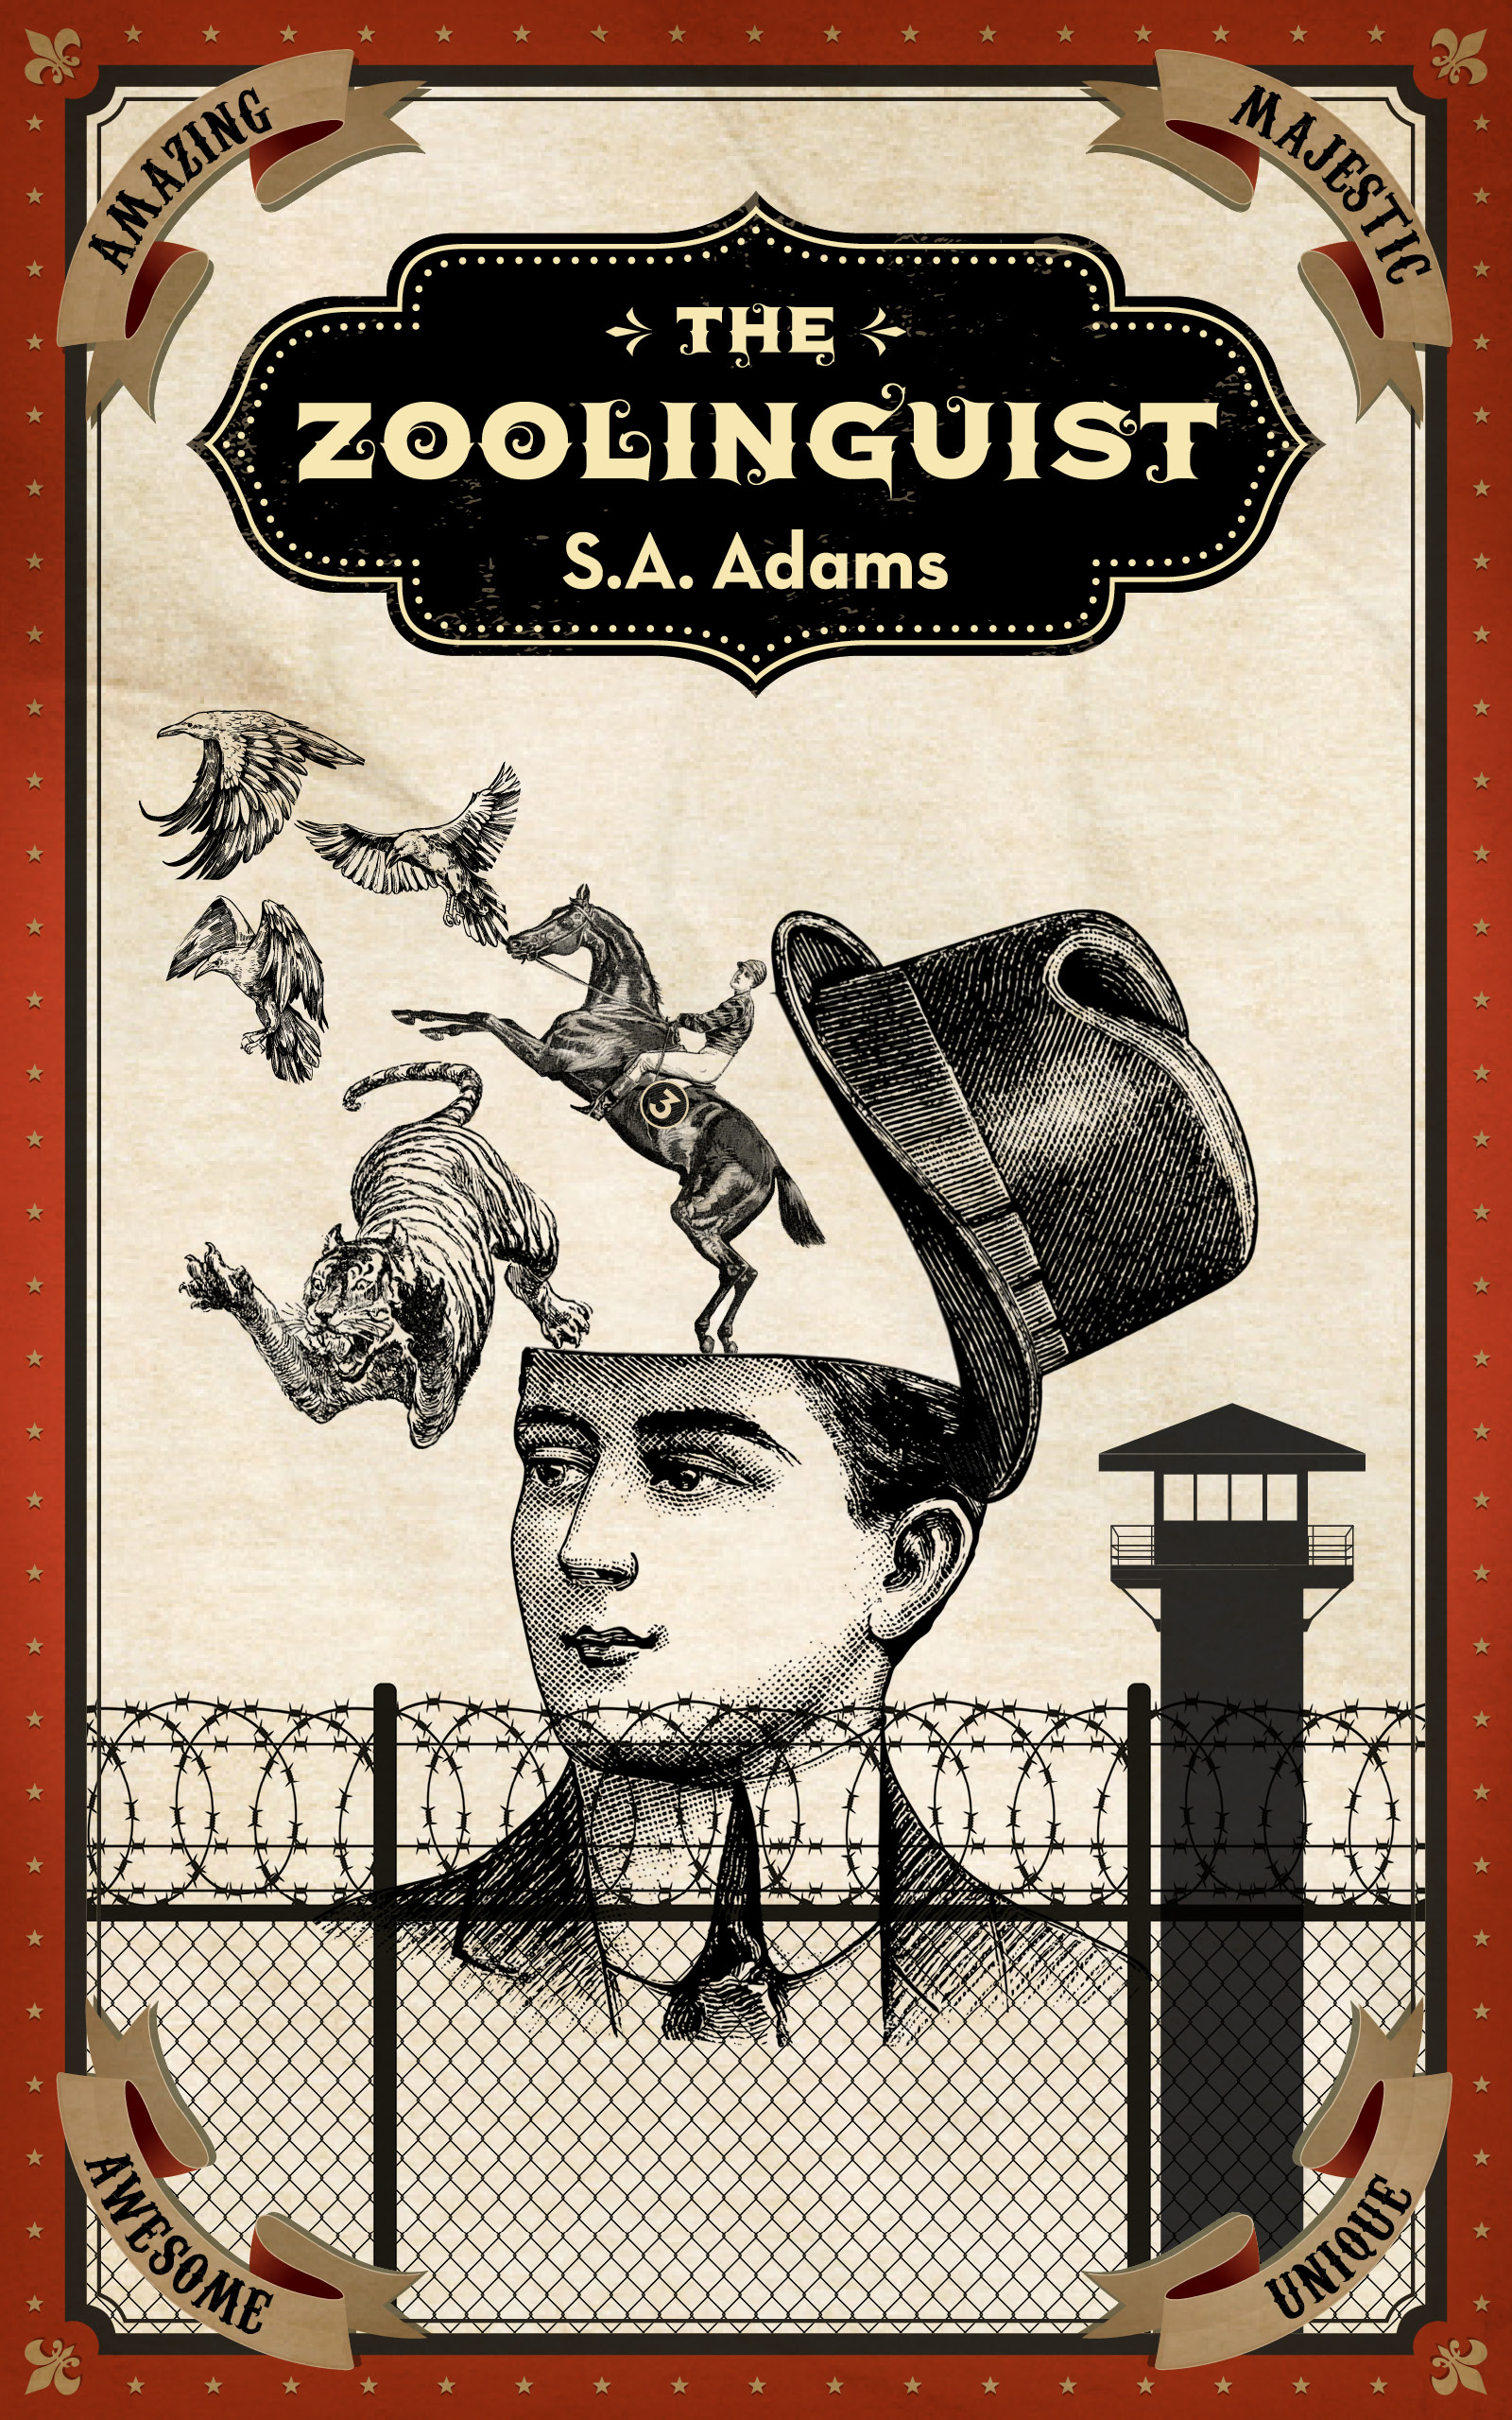 FREE: The Zoolinguist by S. A. Adams